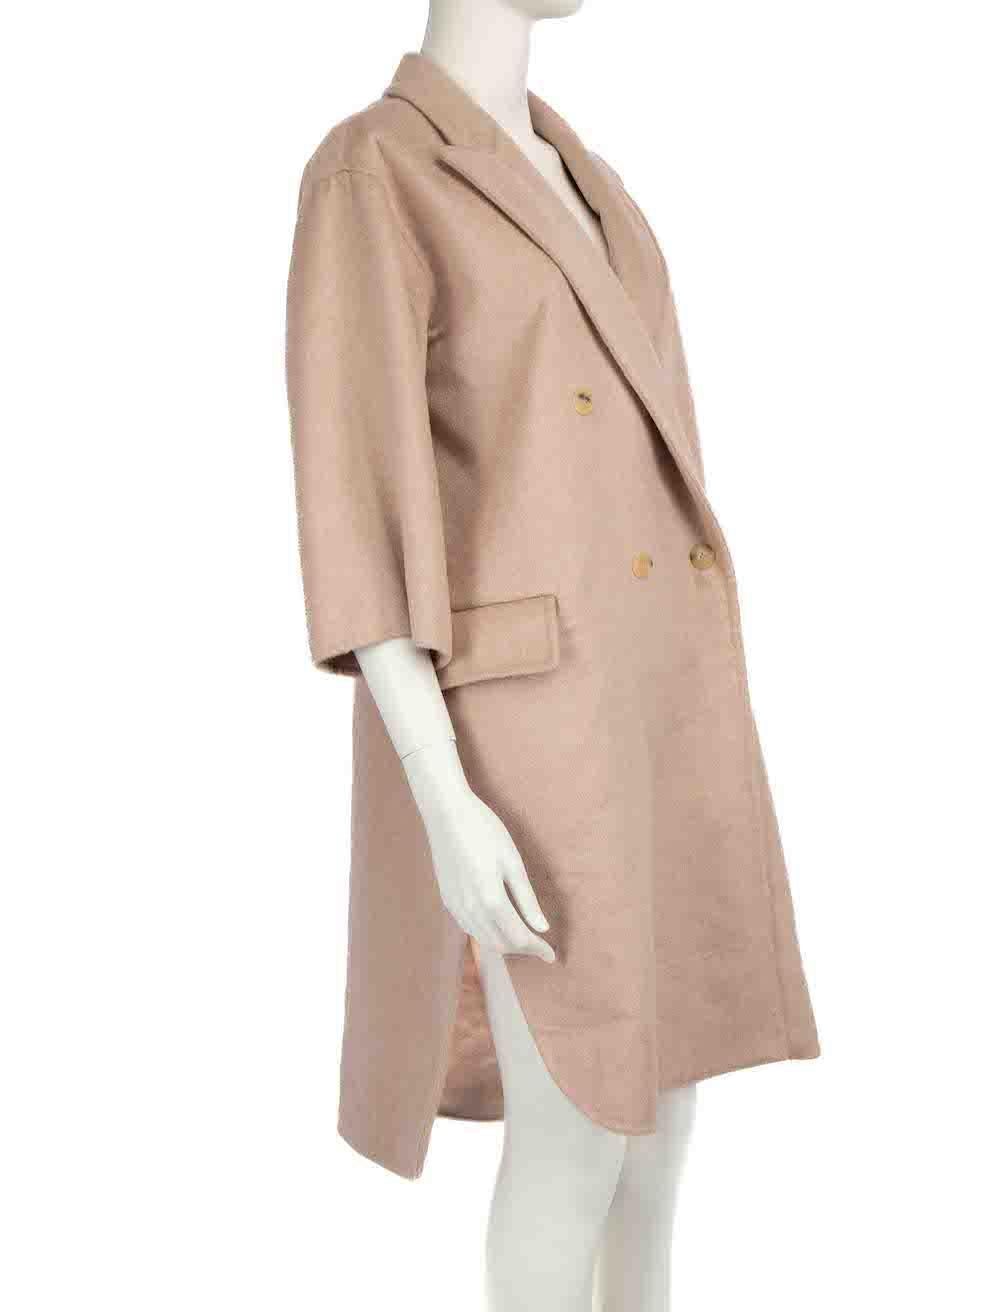 CONDITION is Very good. Hardly any visible wear to coat is evident on this used MaxMara designer resale item.
 
 
 
 Details
 
 
 Pink
 
 Cashmere
 
 Mid length coat
 
 Double breasted
 
 Mid length sleeves
 
 2x Front side pockets with flaps
 
 
 
